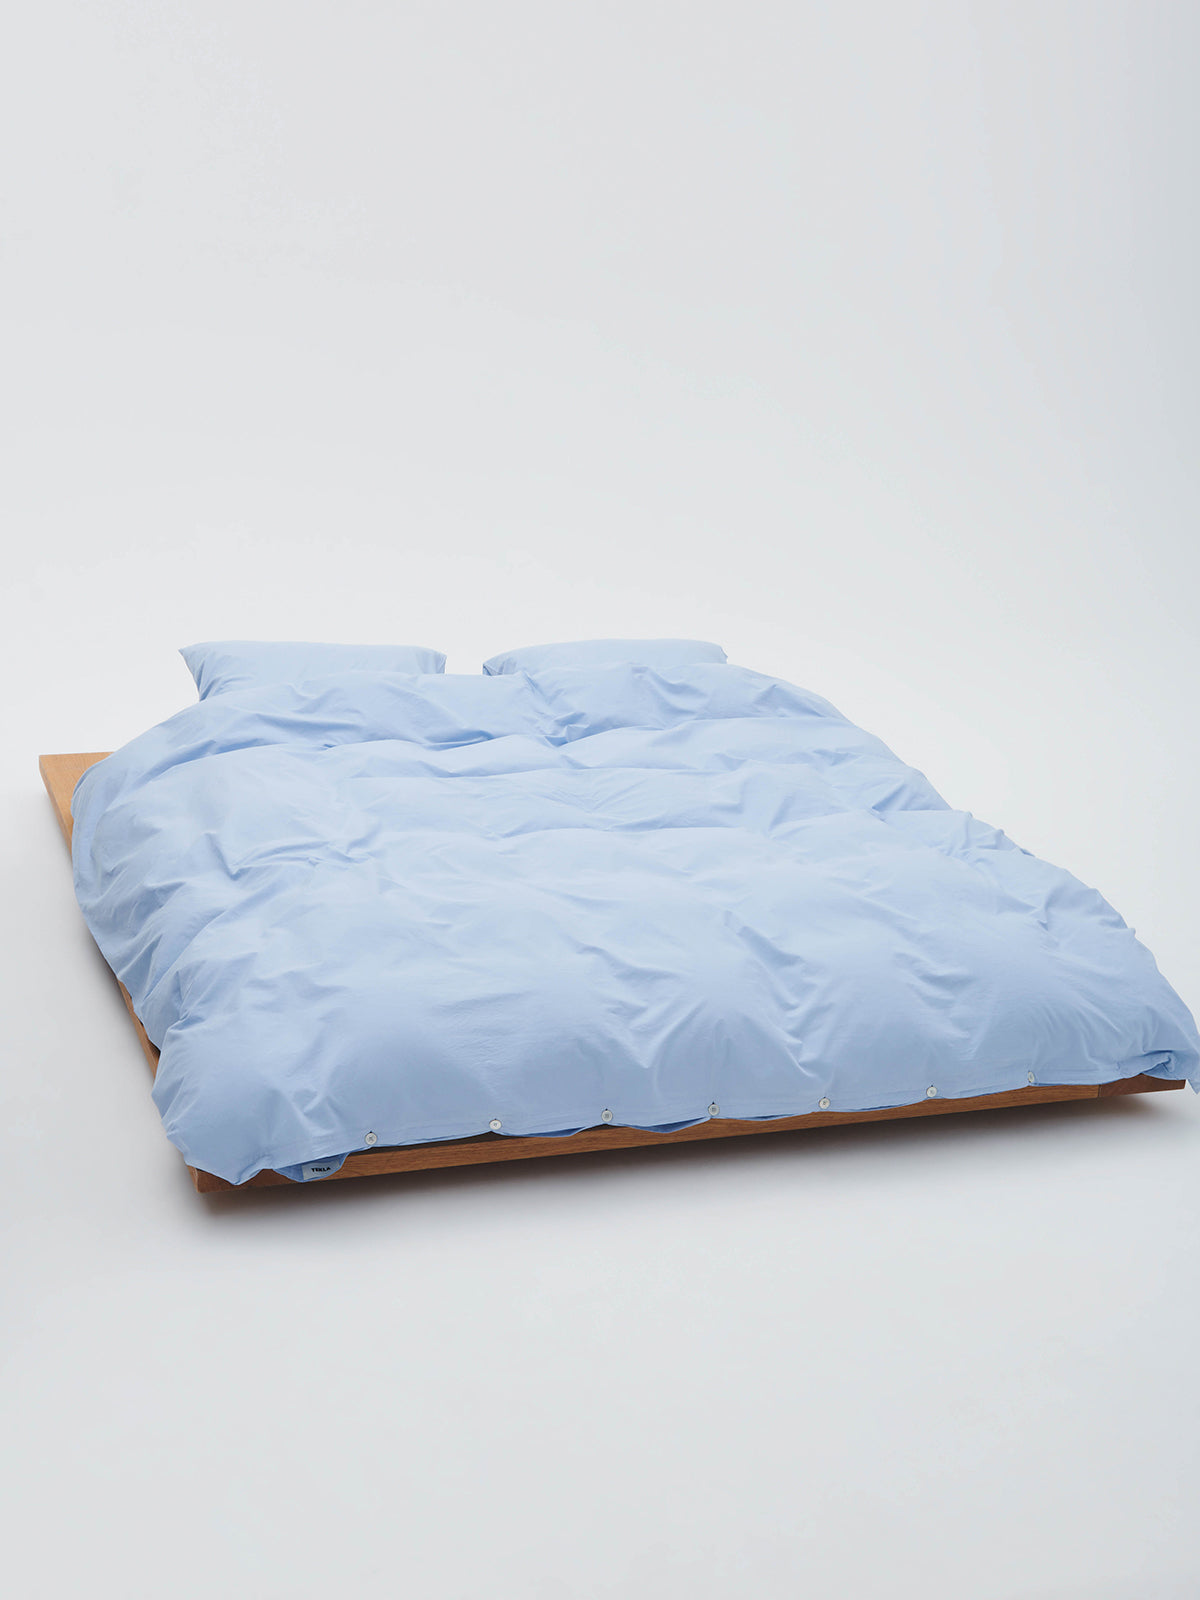 Percale Duvet Cover in Morning Blue